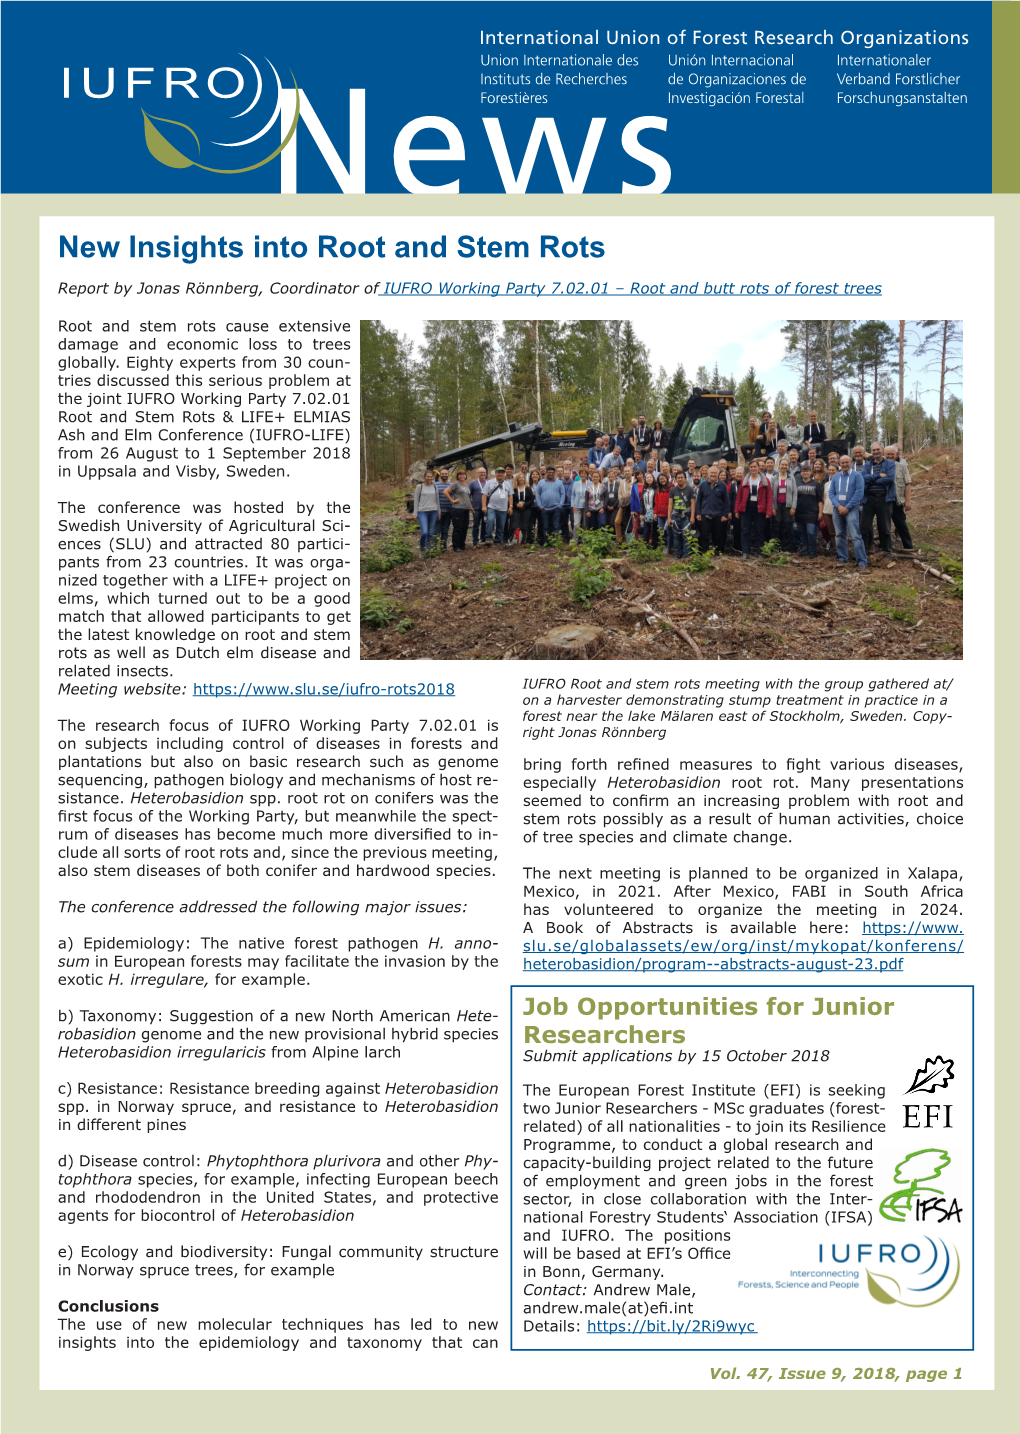 New Insights Into Root and Stem Rots Report by Jonas Rönnberg, Coordinator of IUFRO Working Party 7.02.01 – Root and Butt Rots of Forest Trees